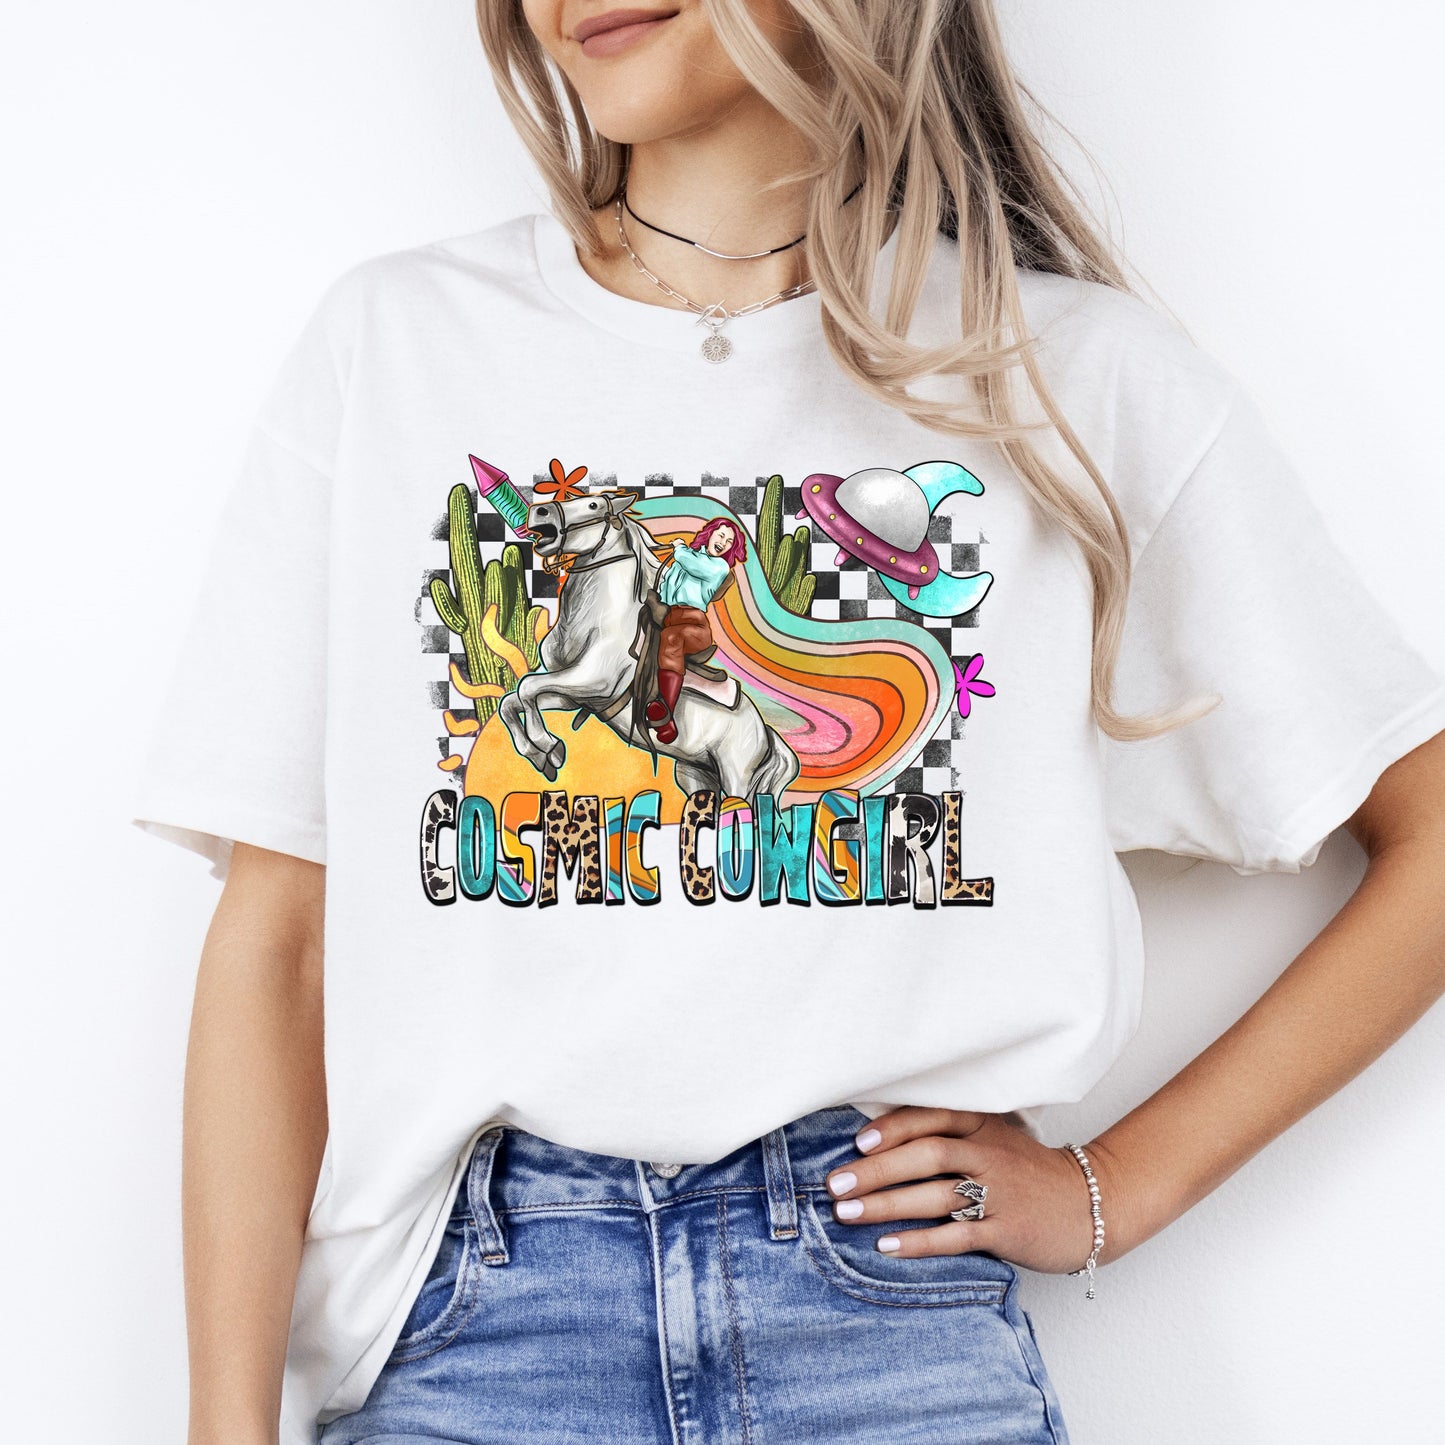 Cosmic cowgirl T-Shirt Alien Texas Western horse cowgirl Unisex tee White Sand Sport Grey-White-Family-Gift-Planet